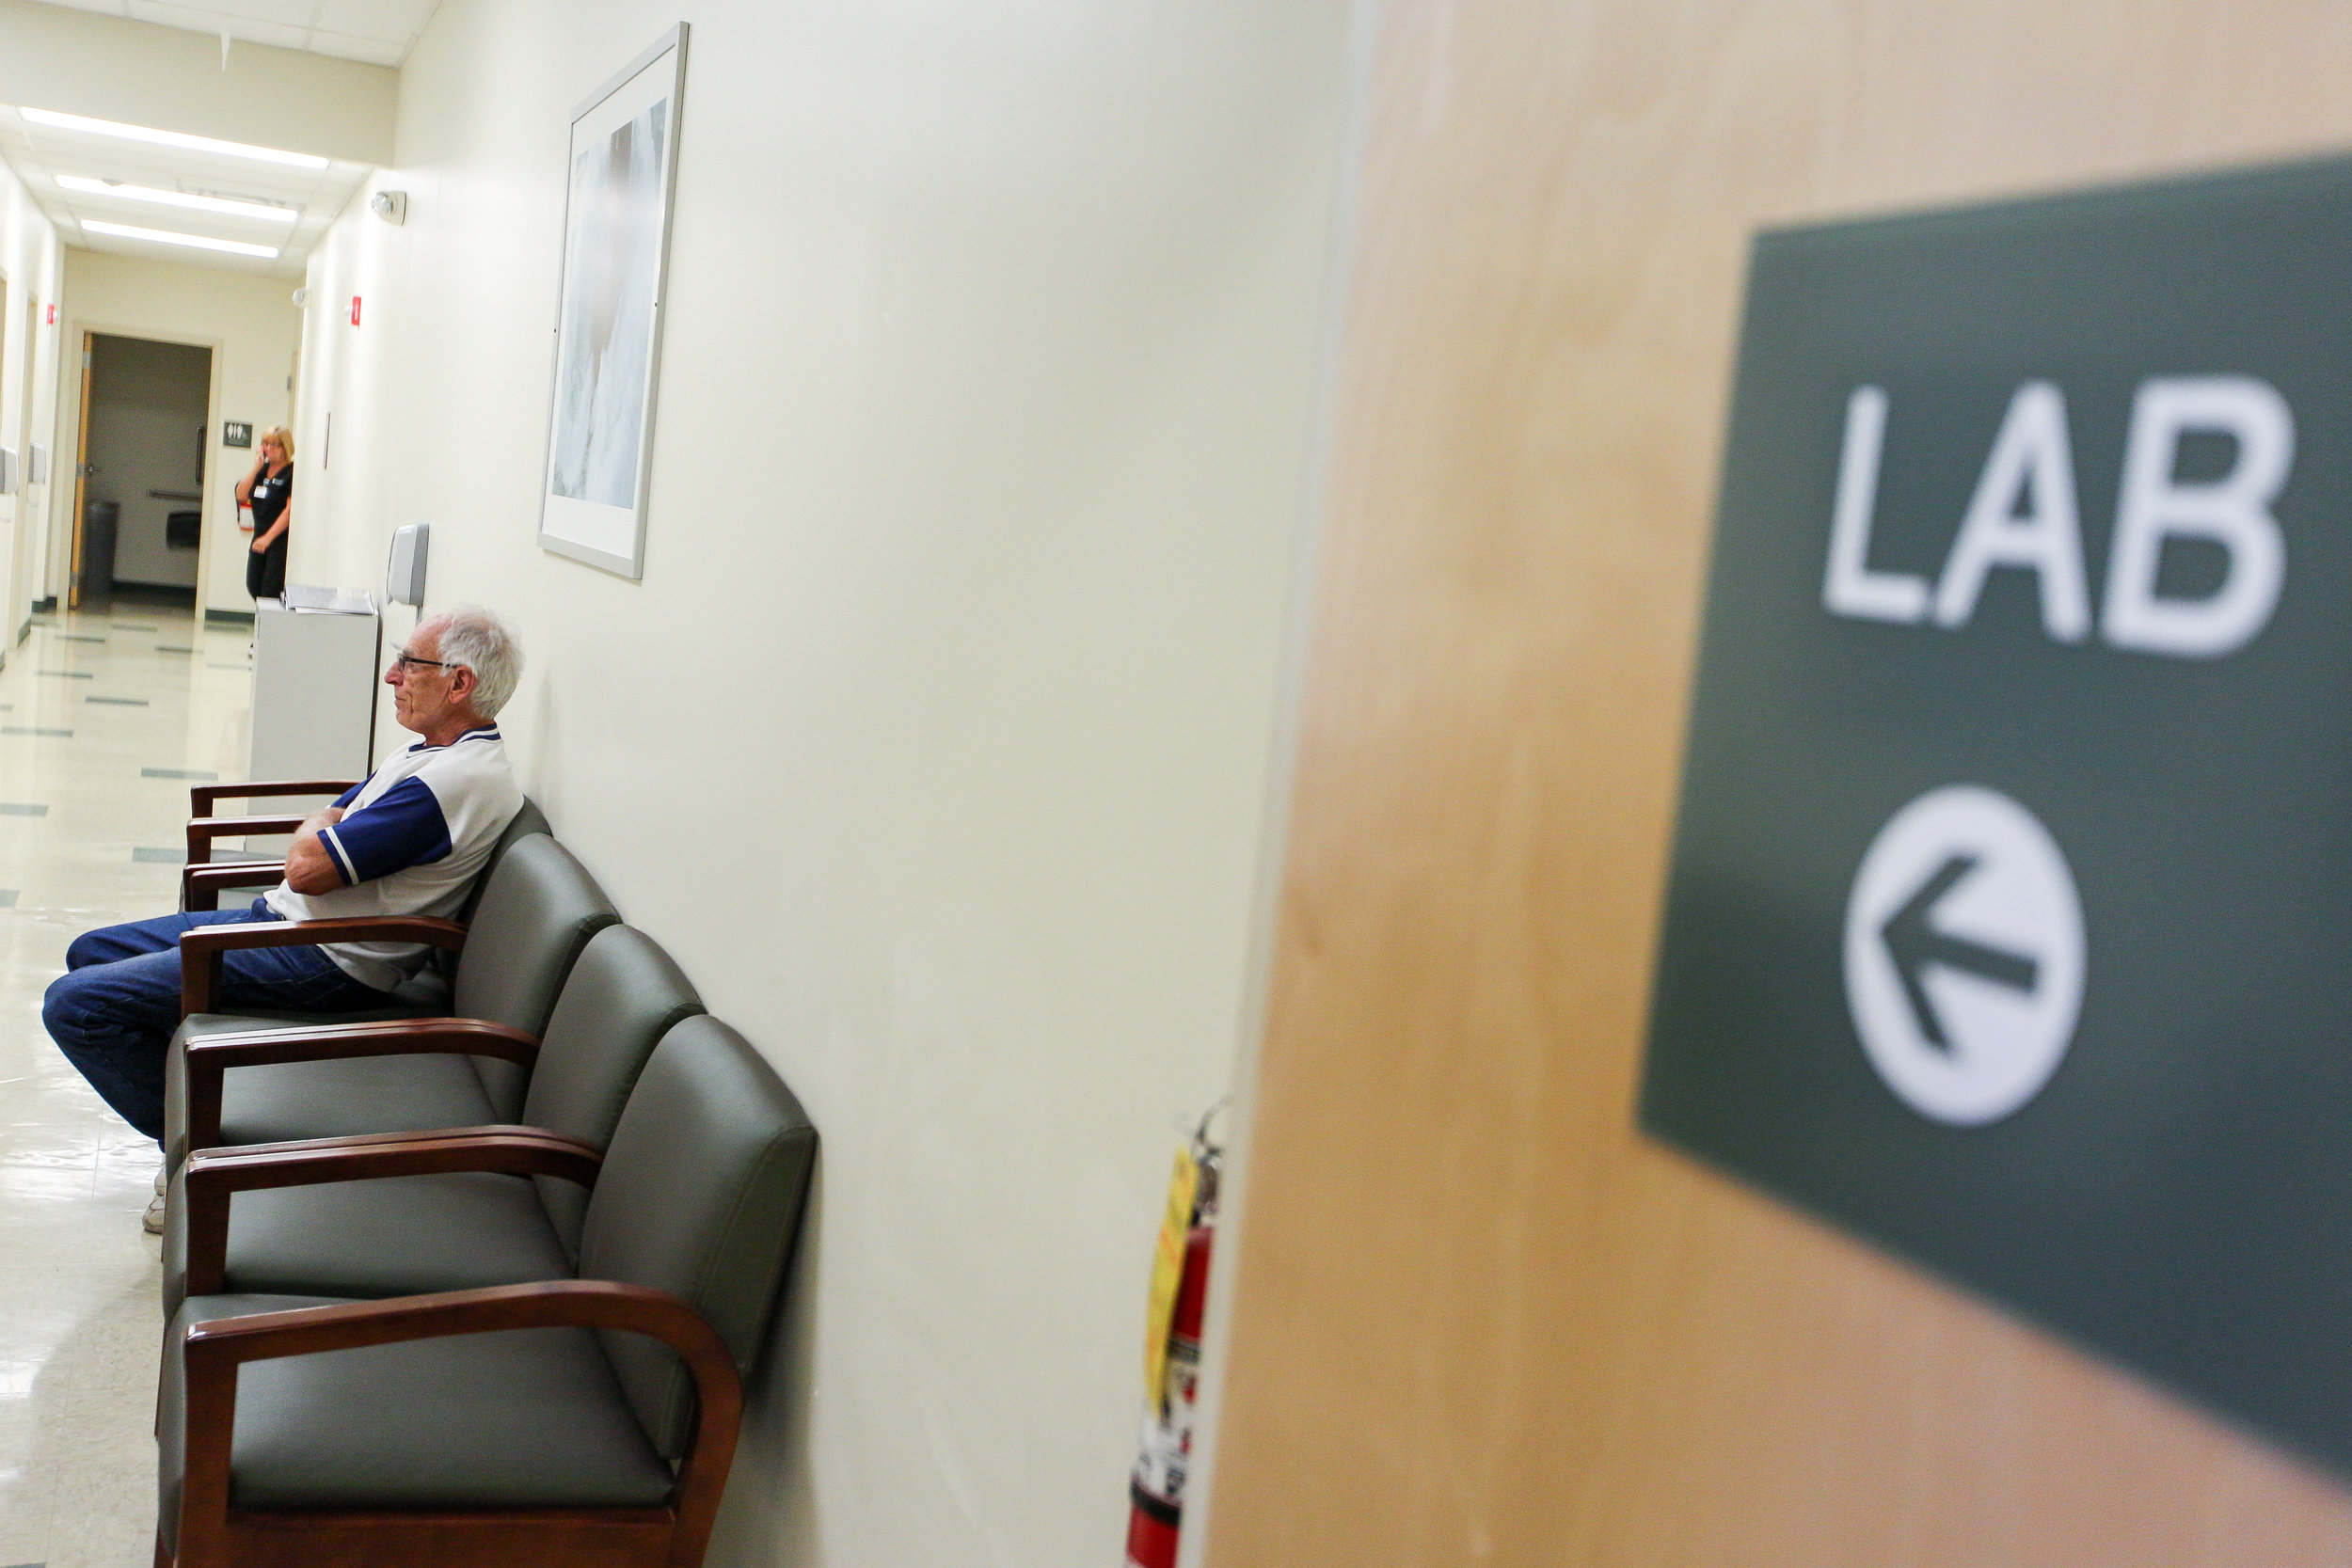  Harold Champion waits to be called back b a nurse for lab work at the Heritage Valley Health System Chippewa Township location on Tuesday morning. Champion is one of nearly 400 people who utilize Heritage Valley Health System each day. 